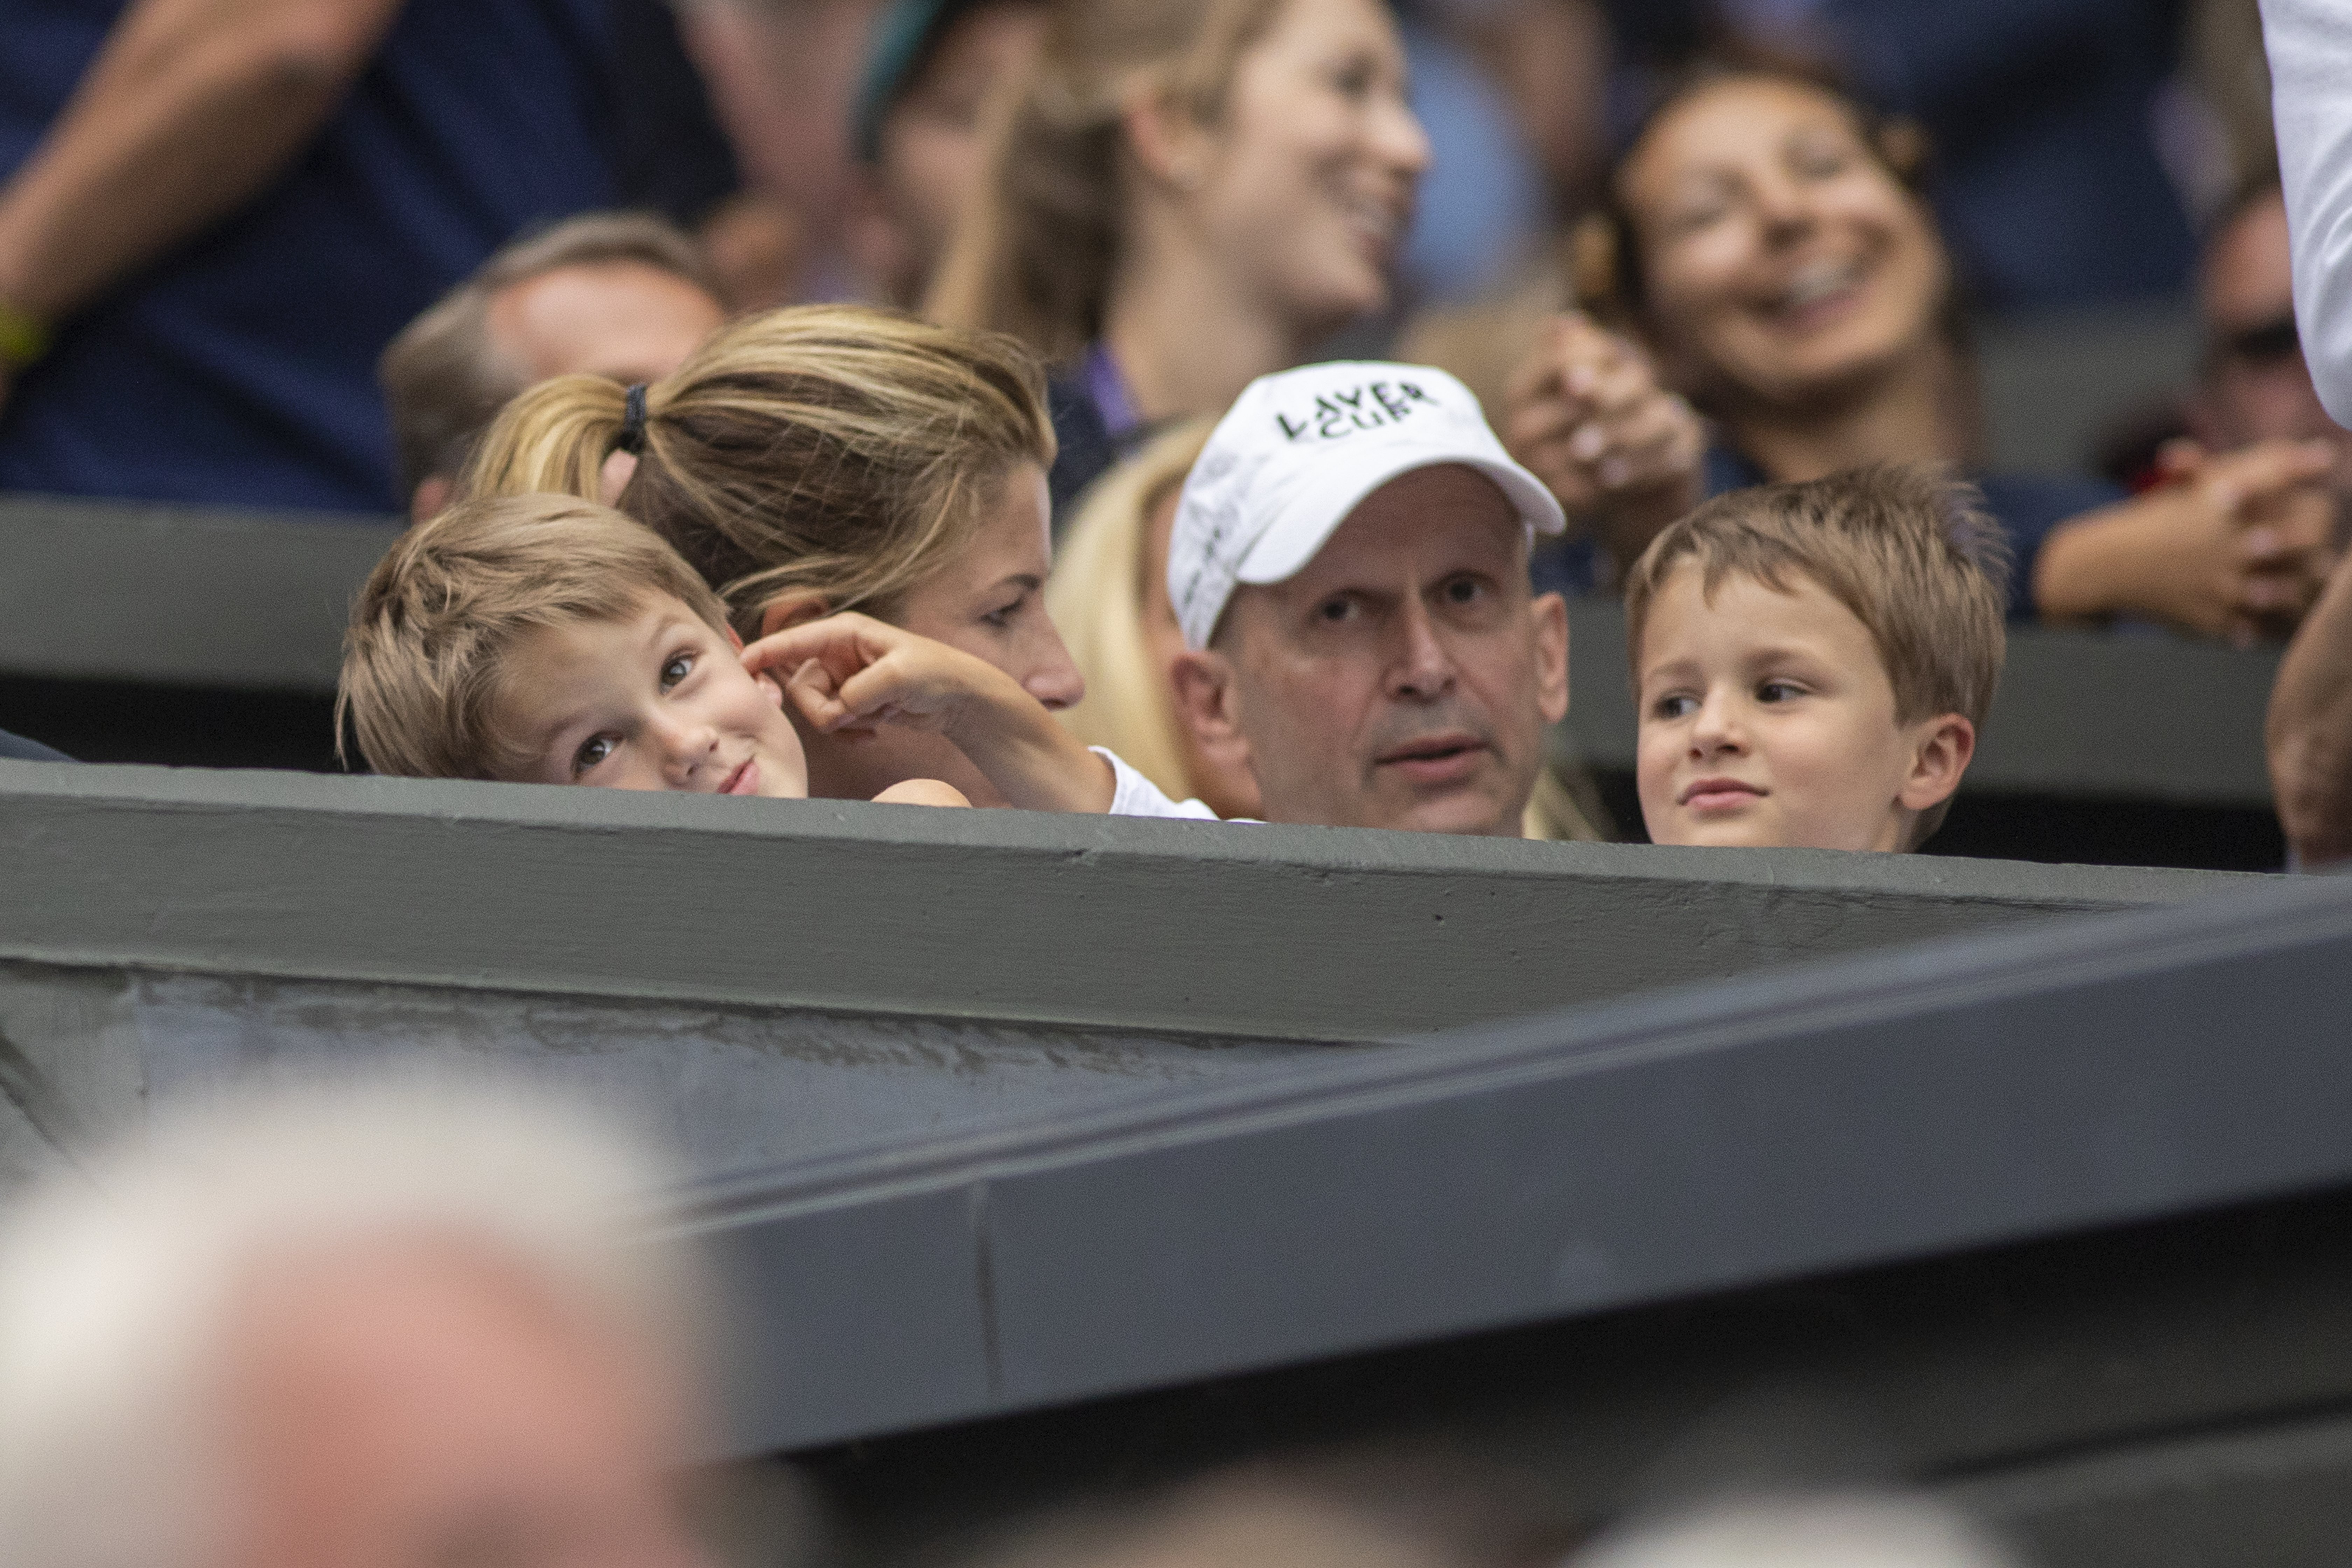 Lennert Federer playfully pokes his brother Leo's face as they sit on the sidelines with their mother, Mirka Federer, at Wimbledon on July 8, 2019, in London, England.  | Source: Getty Images